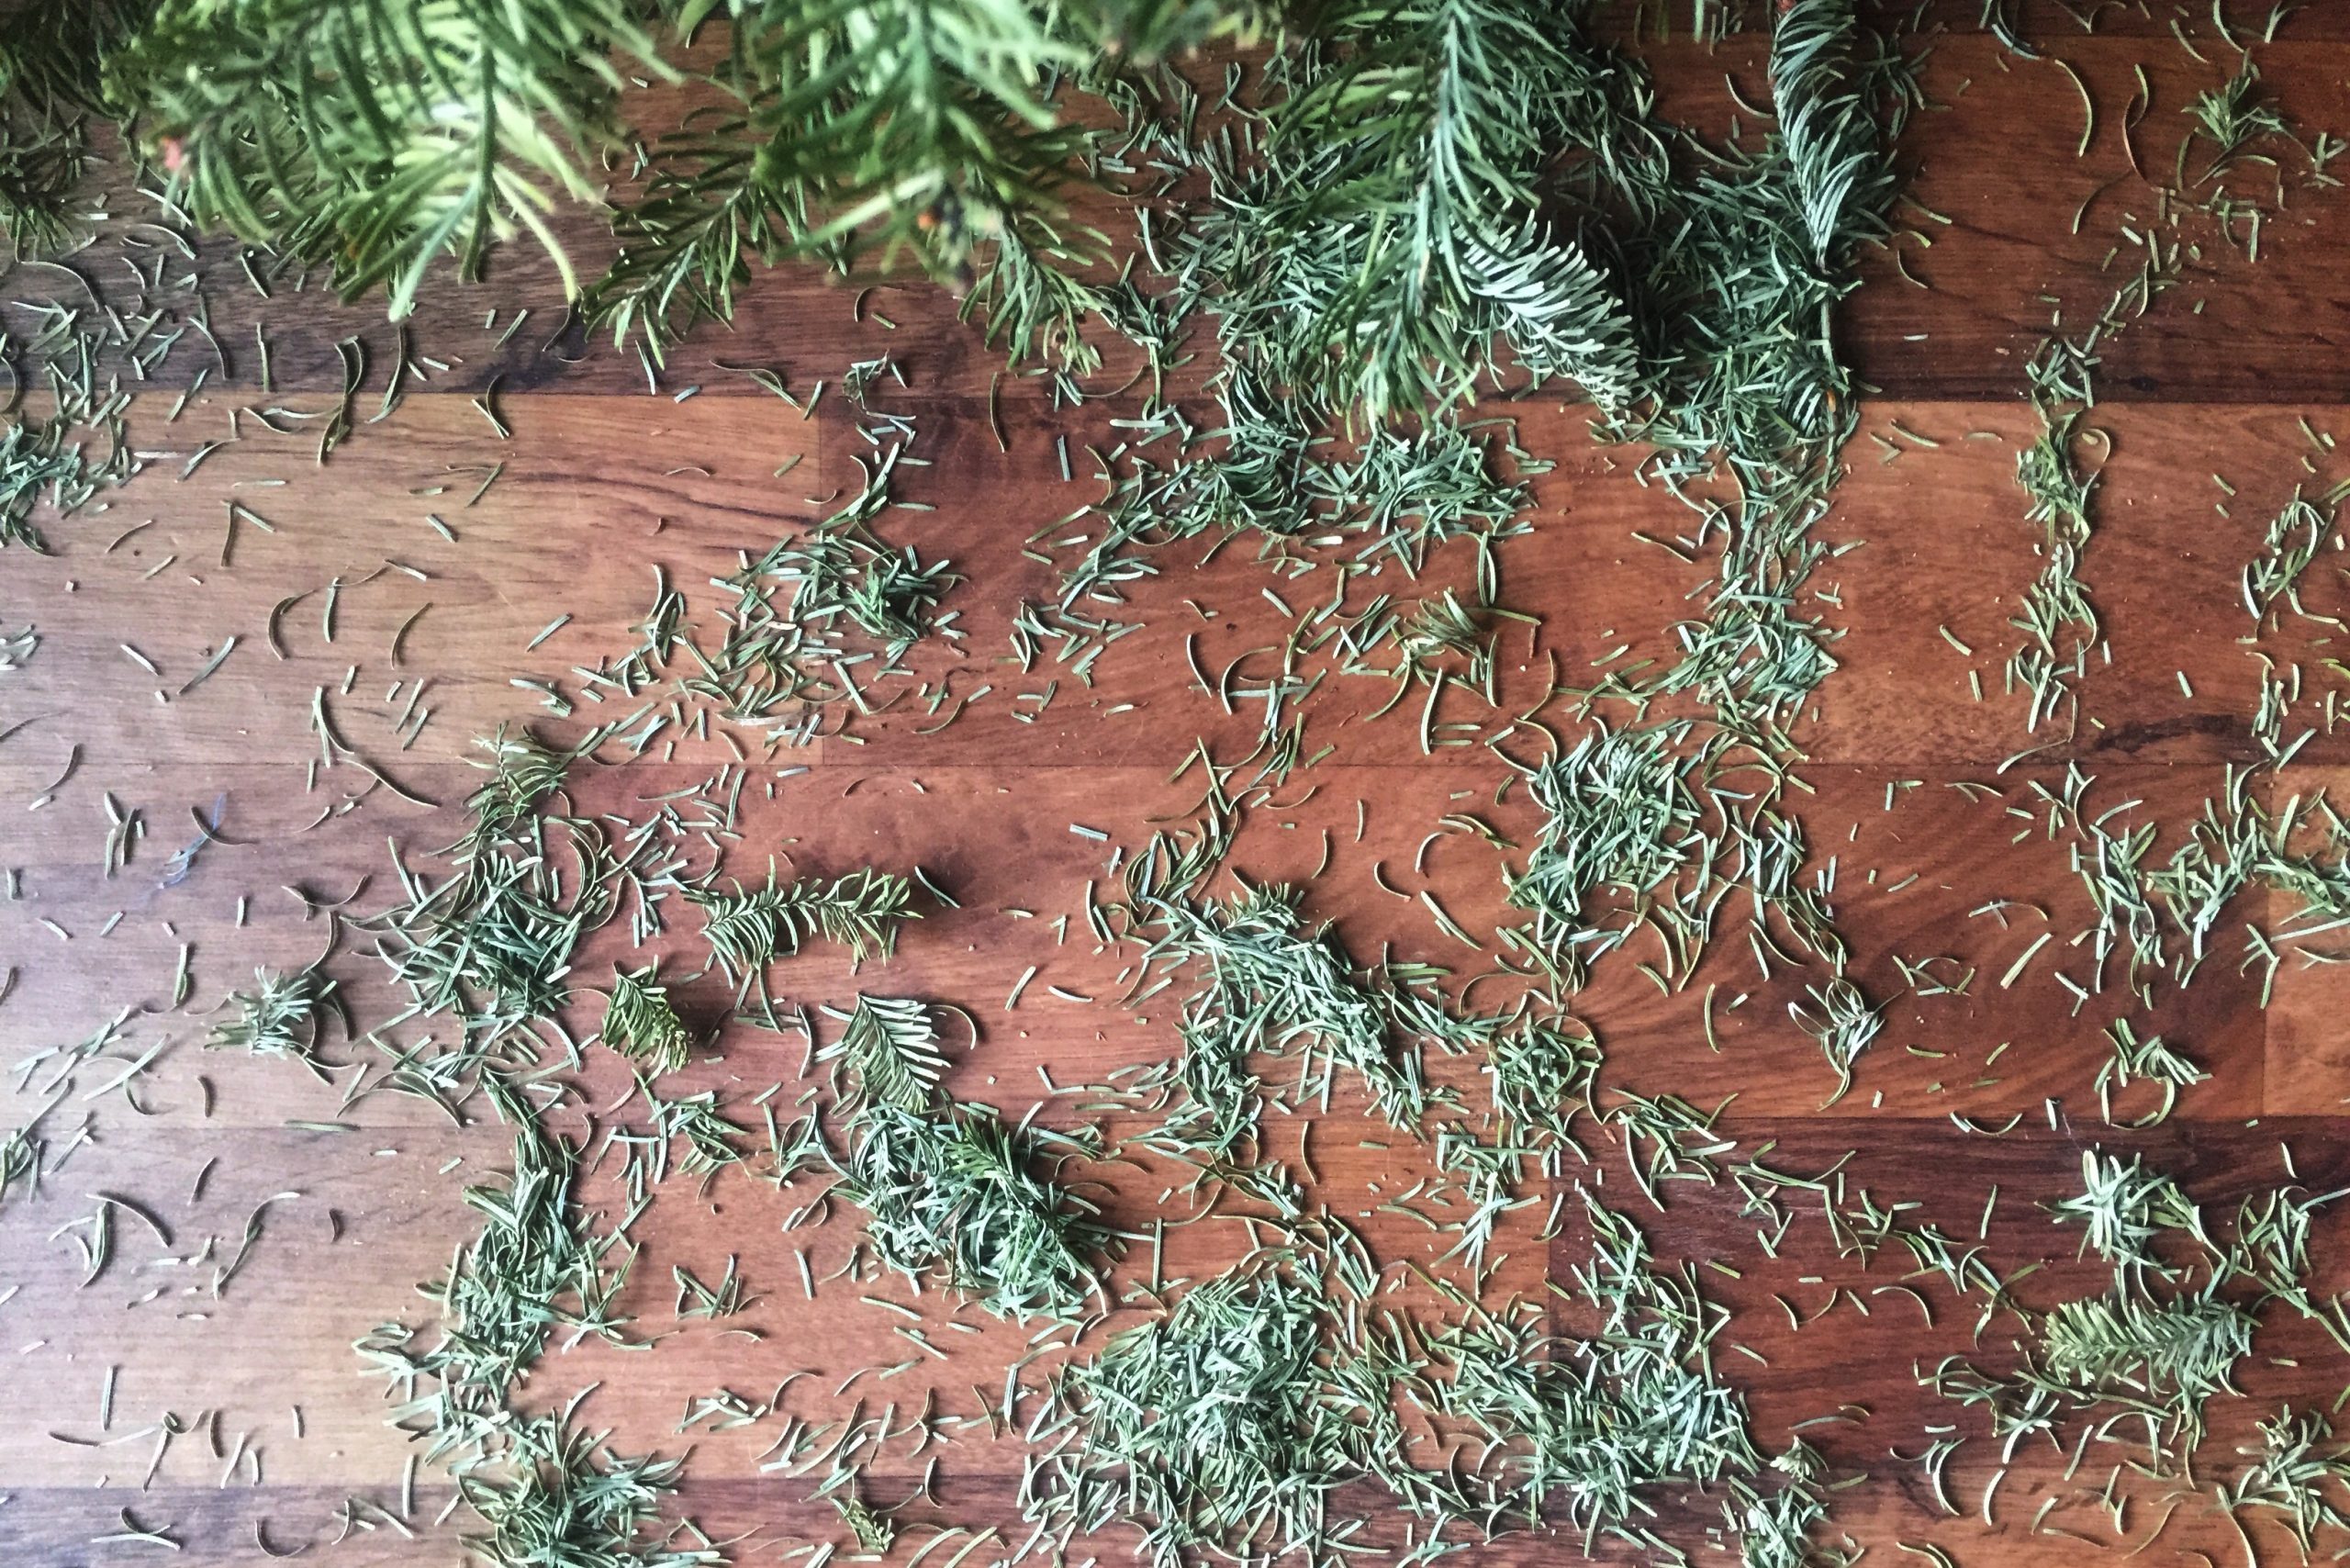 The Best Way to Clean up Christmas Tree Pine Needles